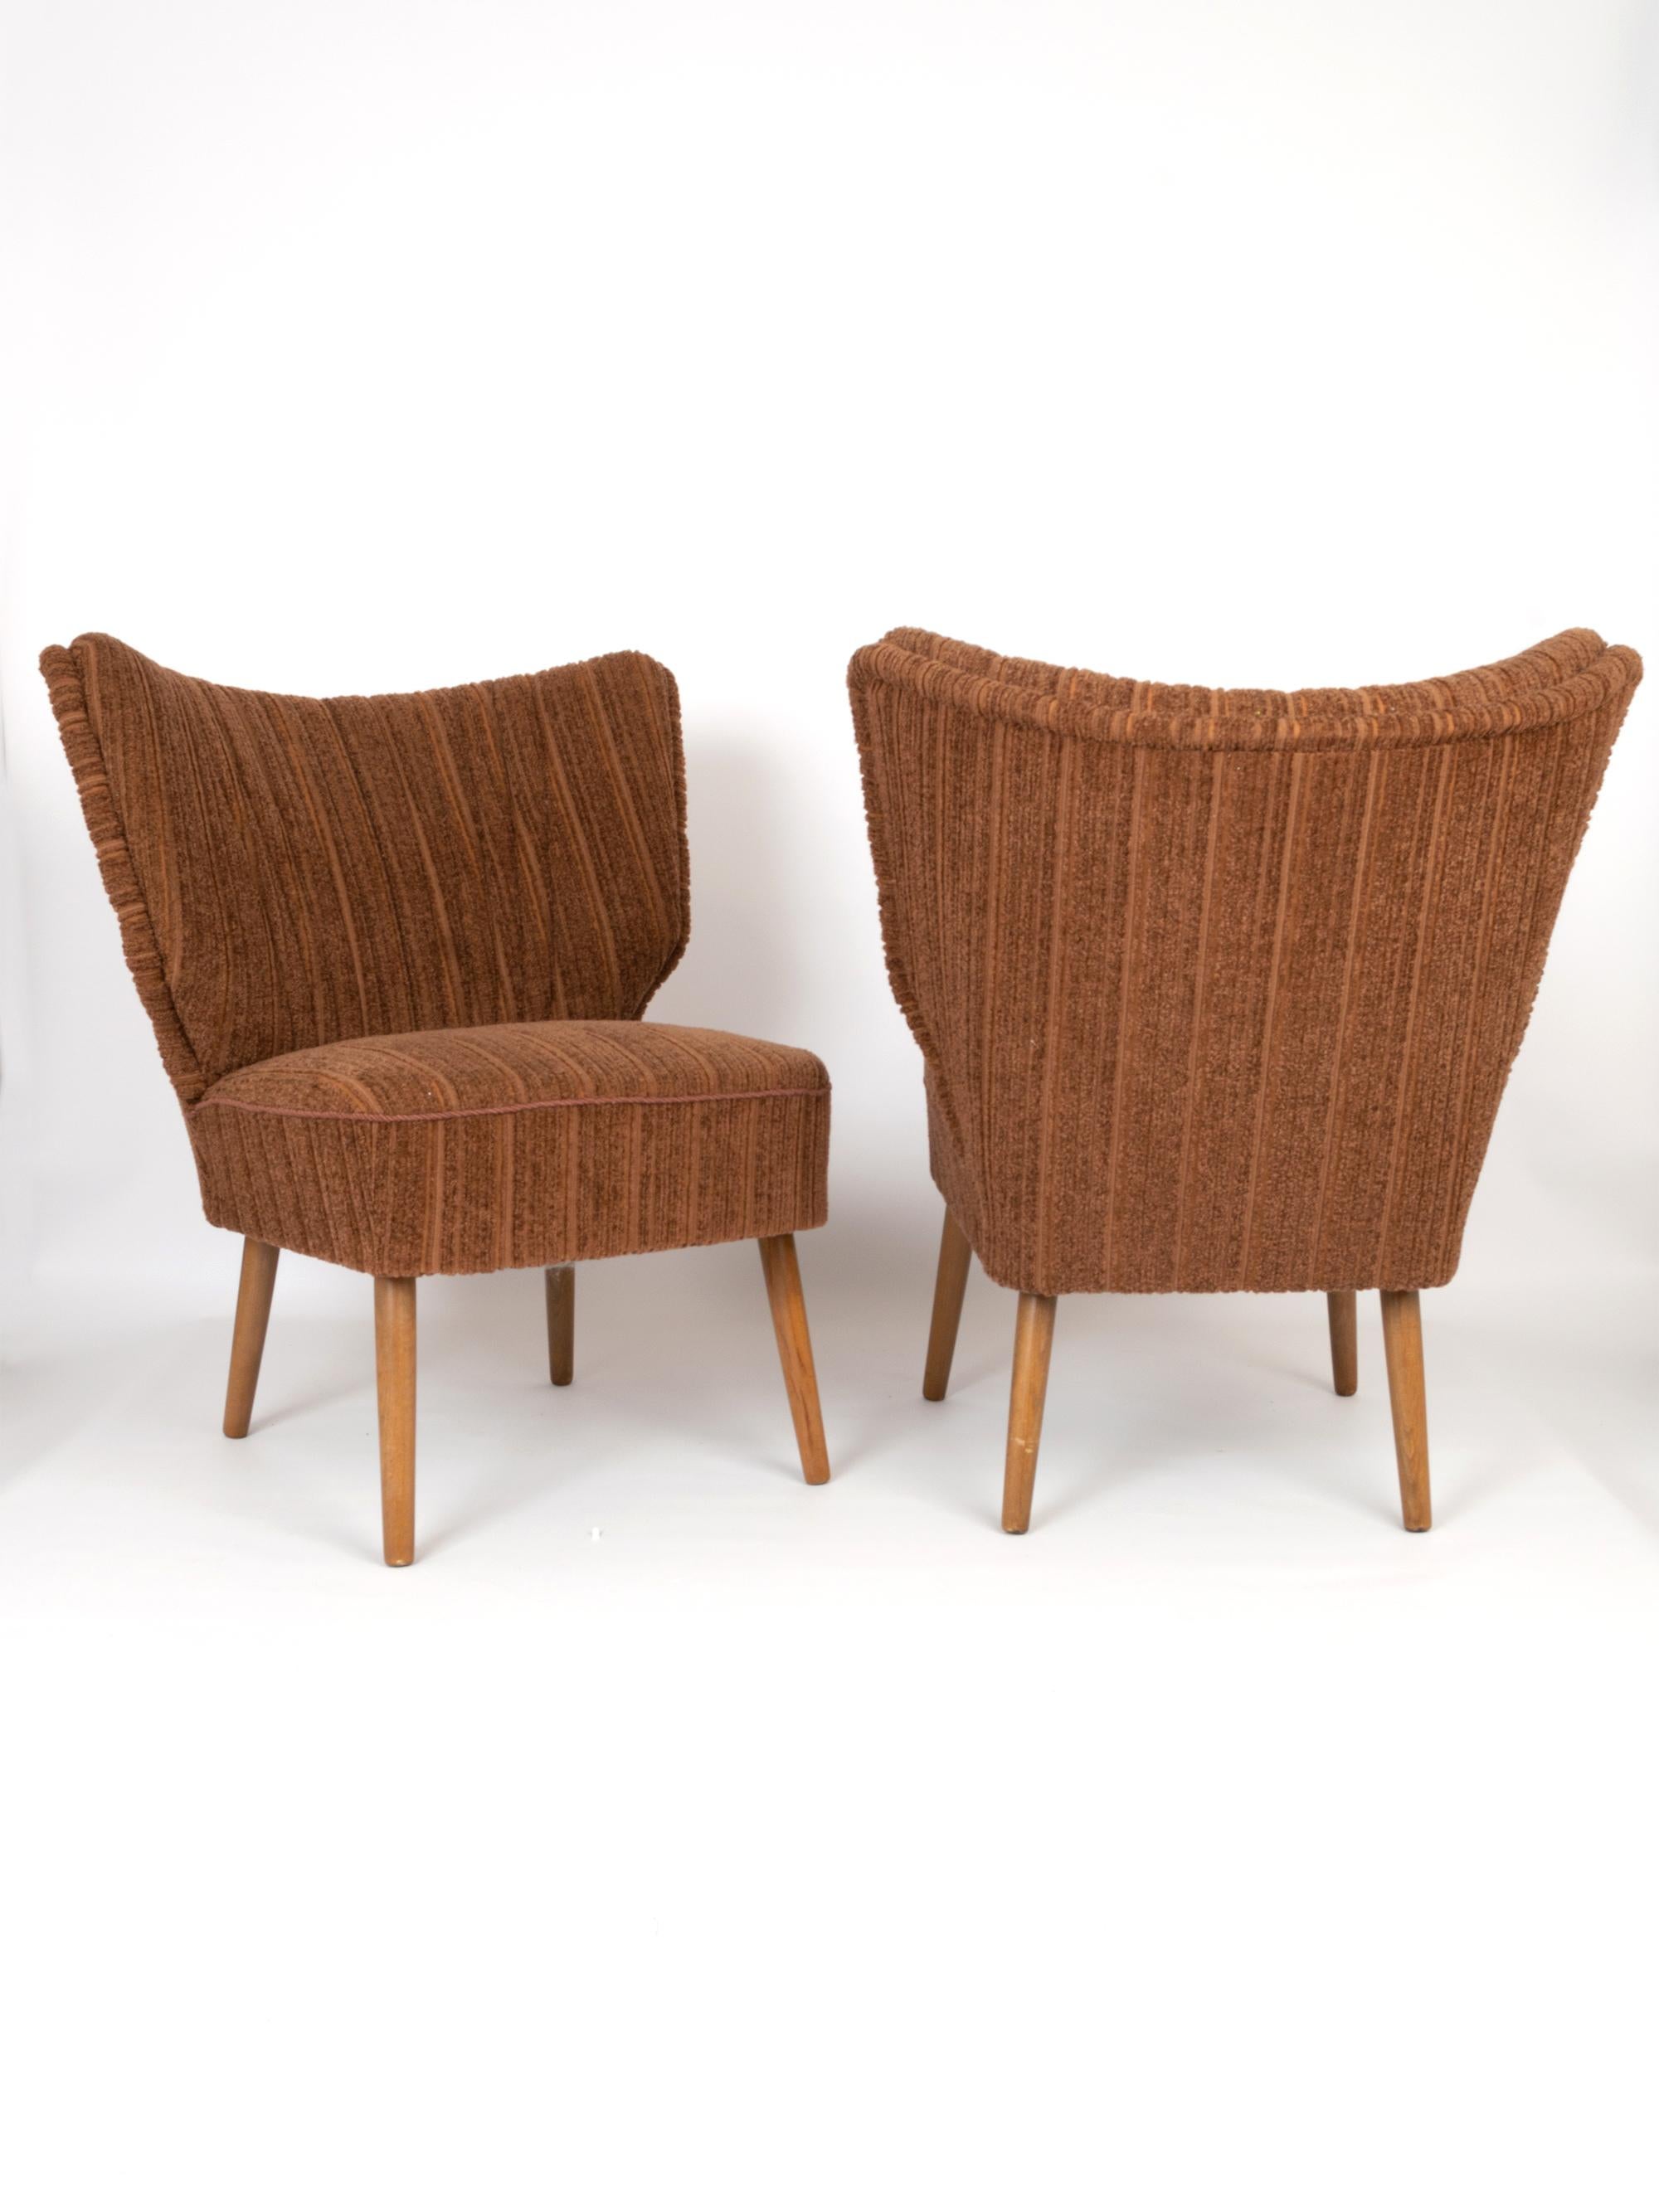 An elegant pair of original Danish cocktail chairs dating from C.1950. 
The original upholstery and fabric are presented in excellent vintage condition. The teak legs are solid and sound.